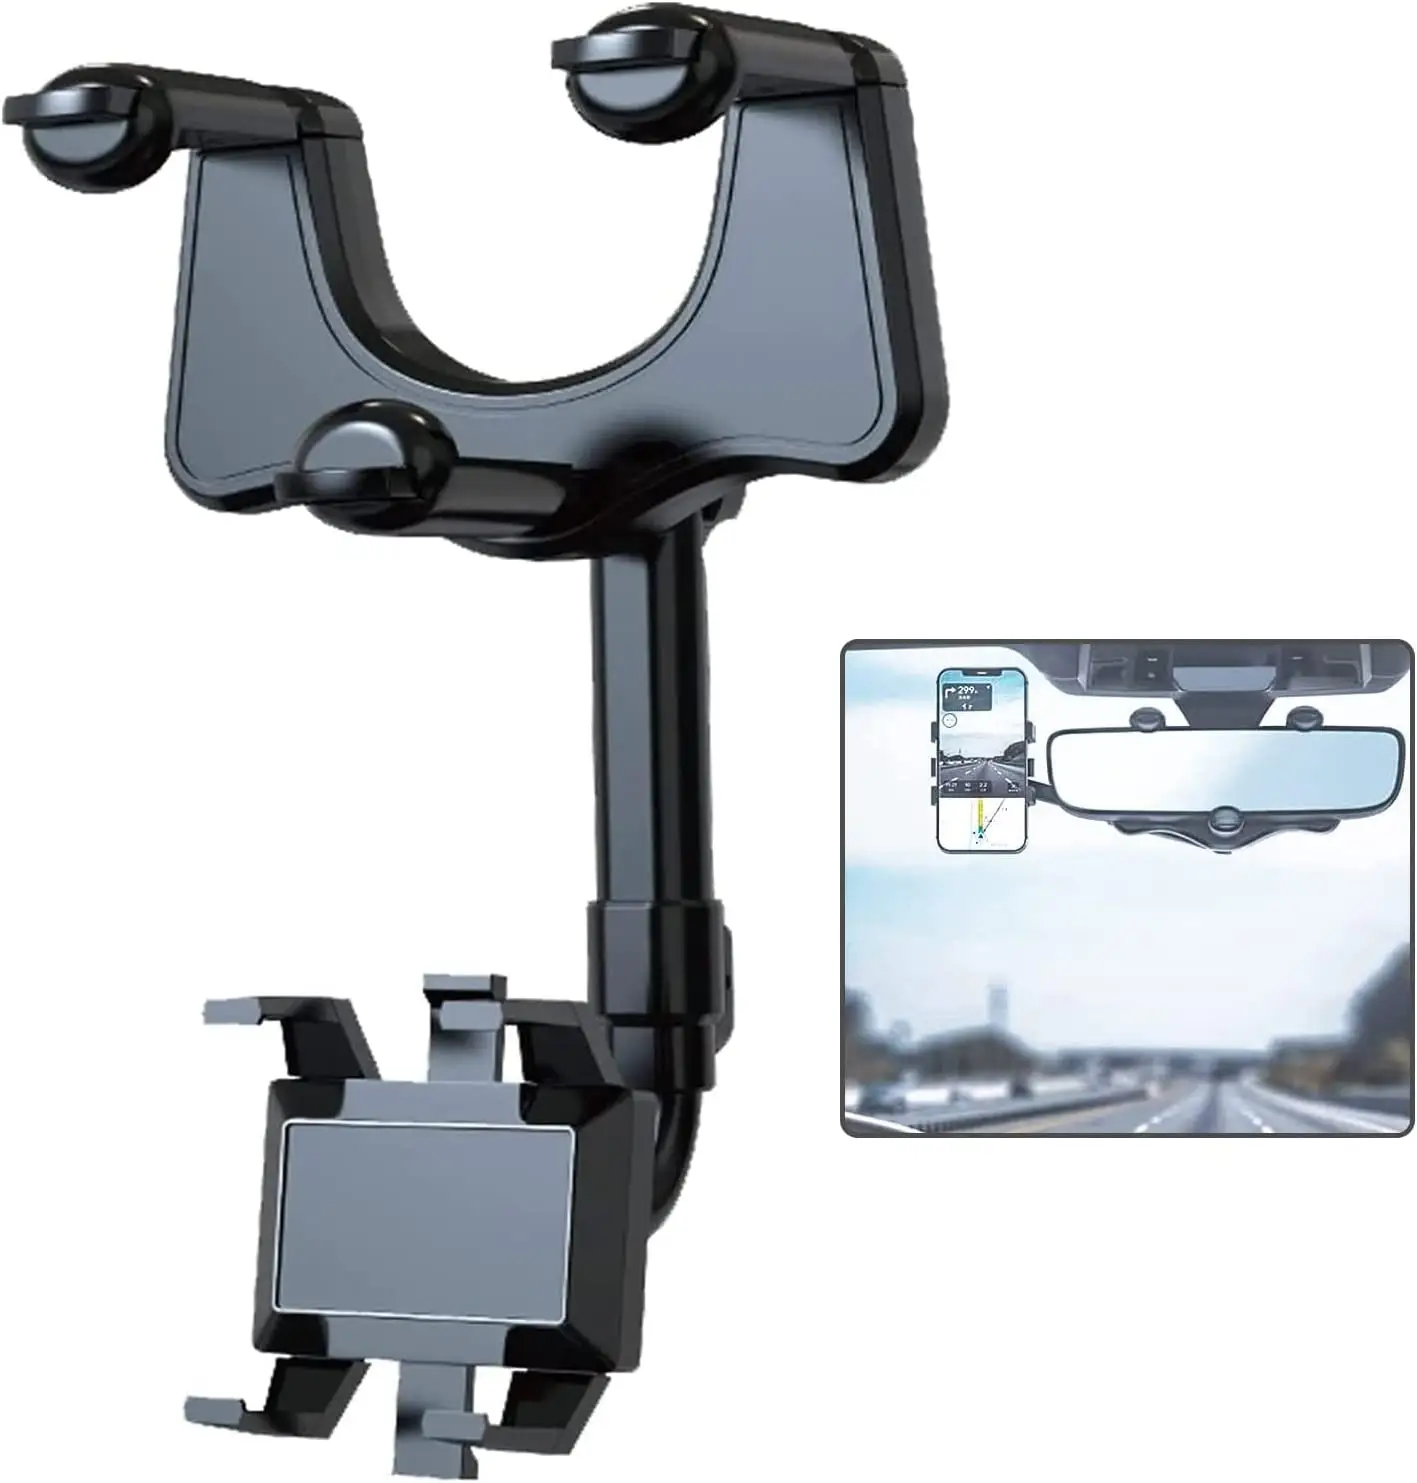 Rearview Mirror Cell Phone holder in Car 360 Degree Rotatable Car Telephone Support Stand Adjustable Telescopic Car Phone Holder